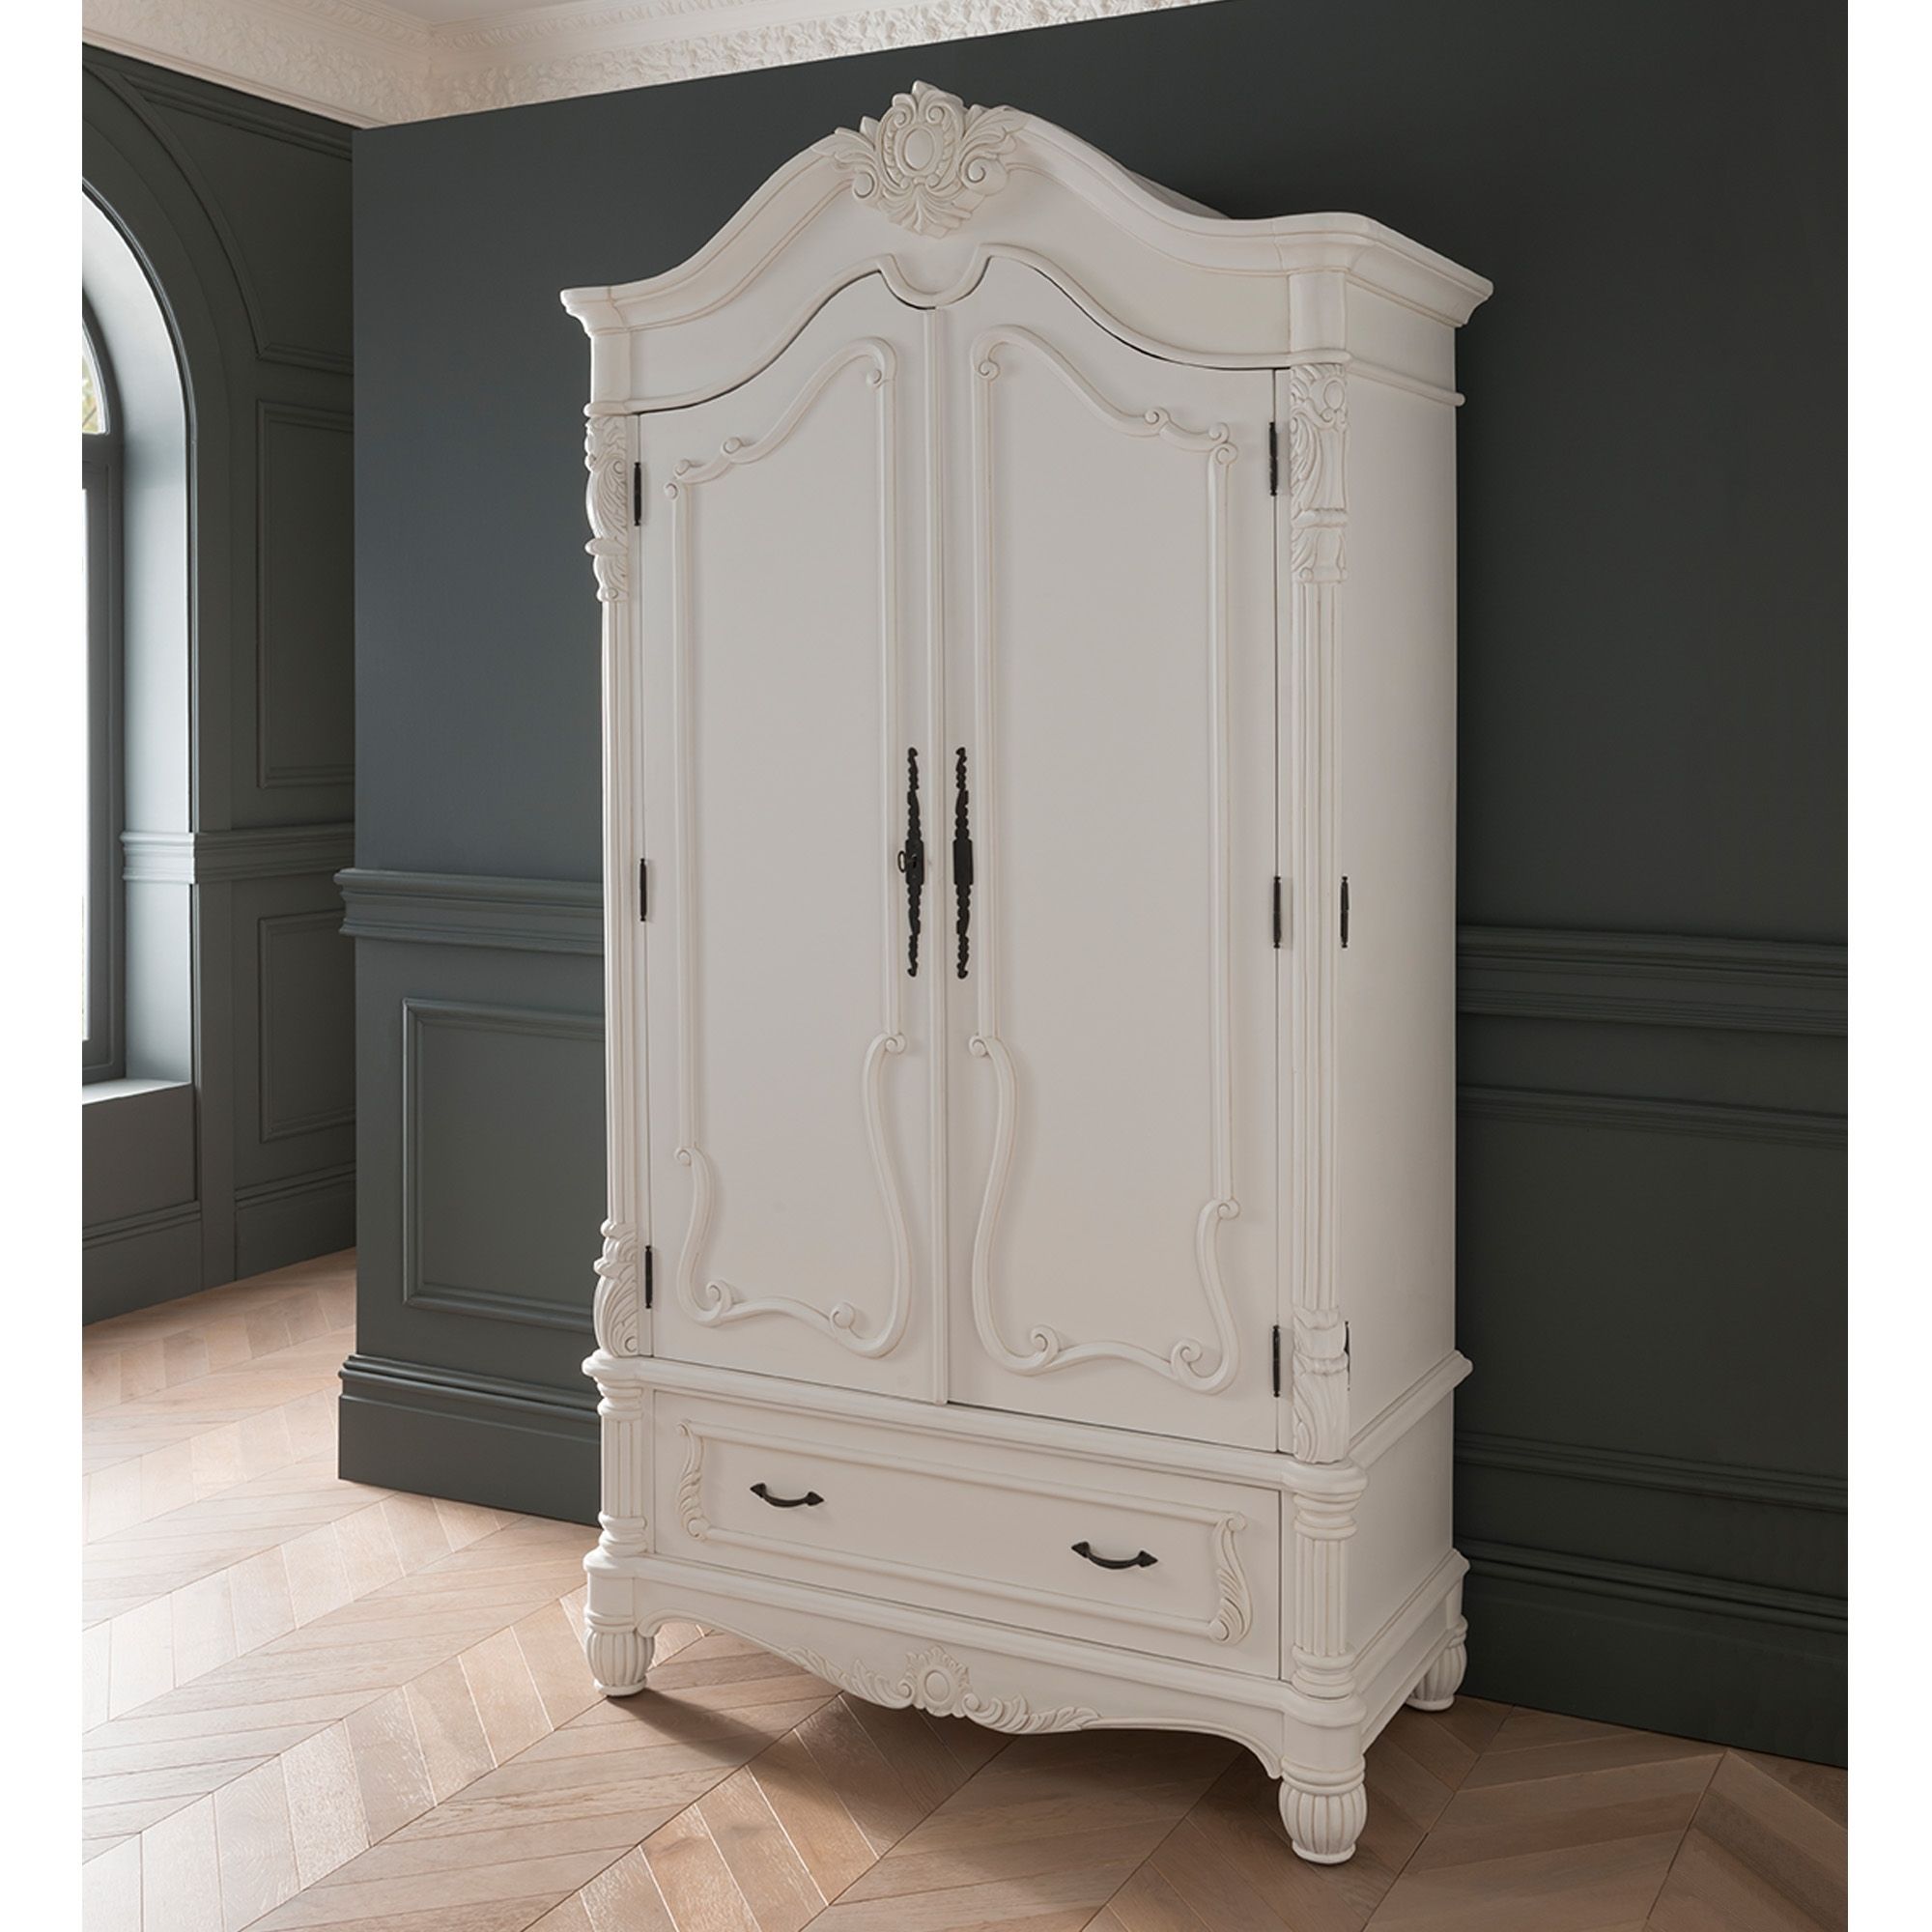 Antique French Style White Finished 1 Drawer Wardrobe | Homesdirect365 With Antique White Wardrobes (Photo 1 of 15)